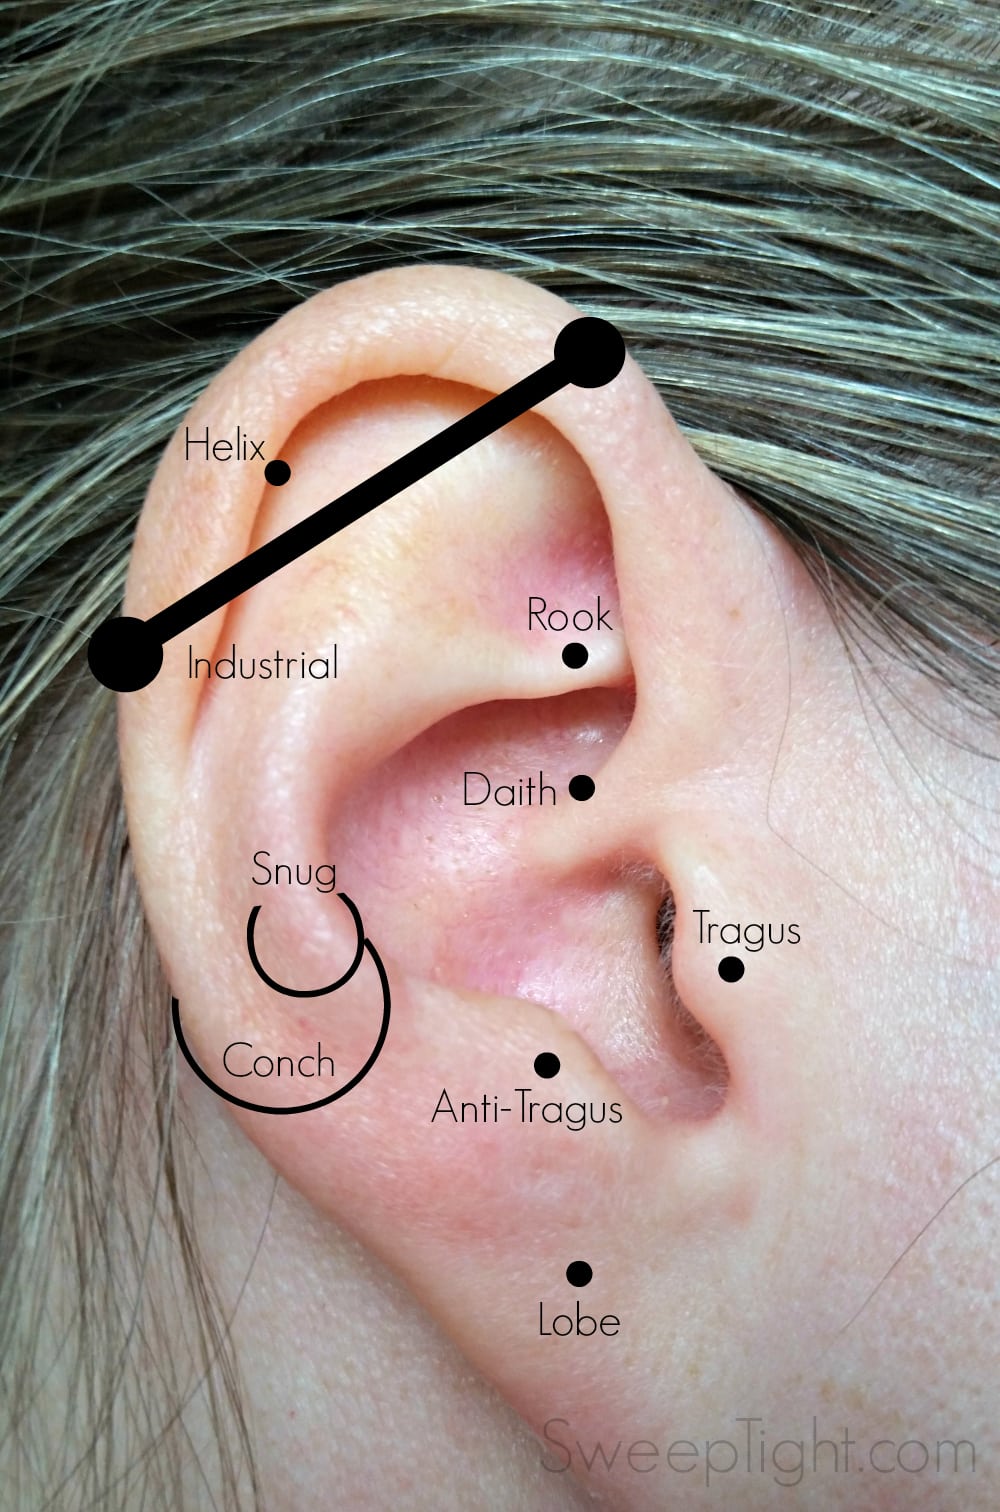 Trying Daith Piercing For Migraines After Years Of Pain